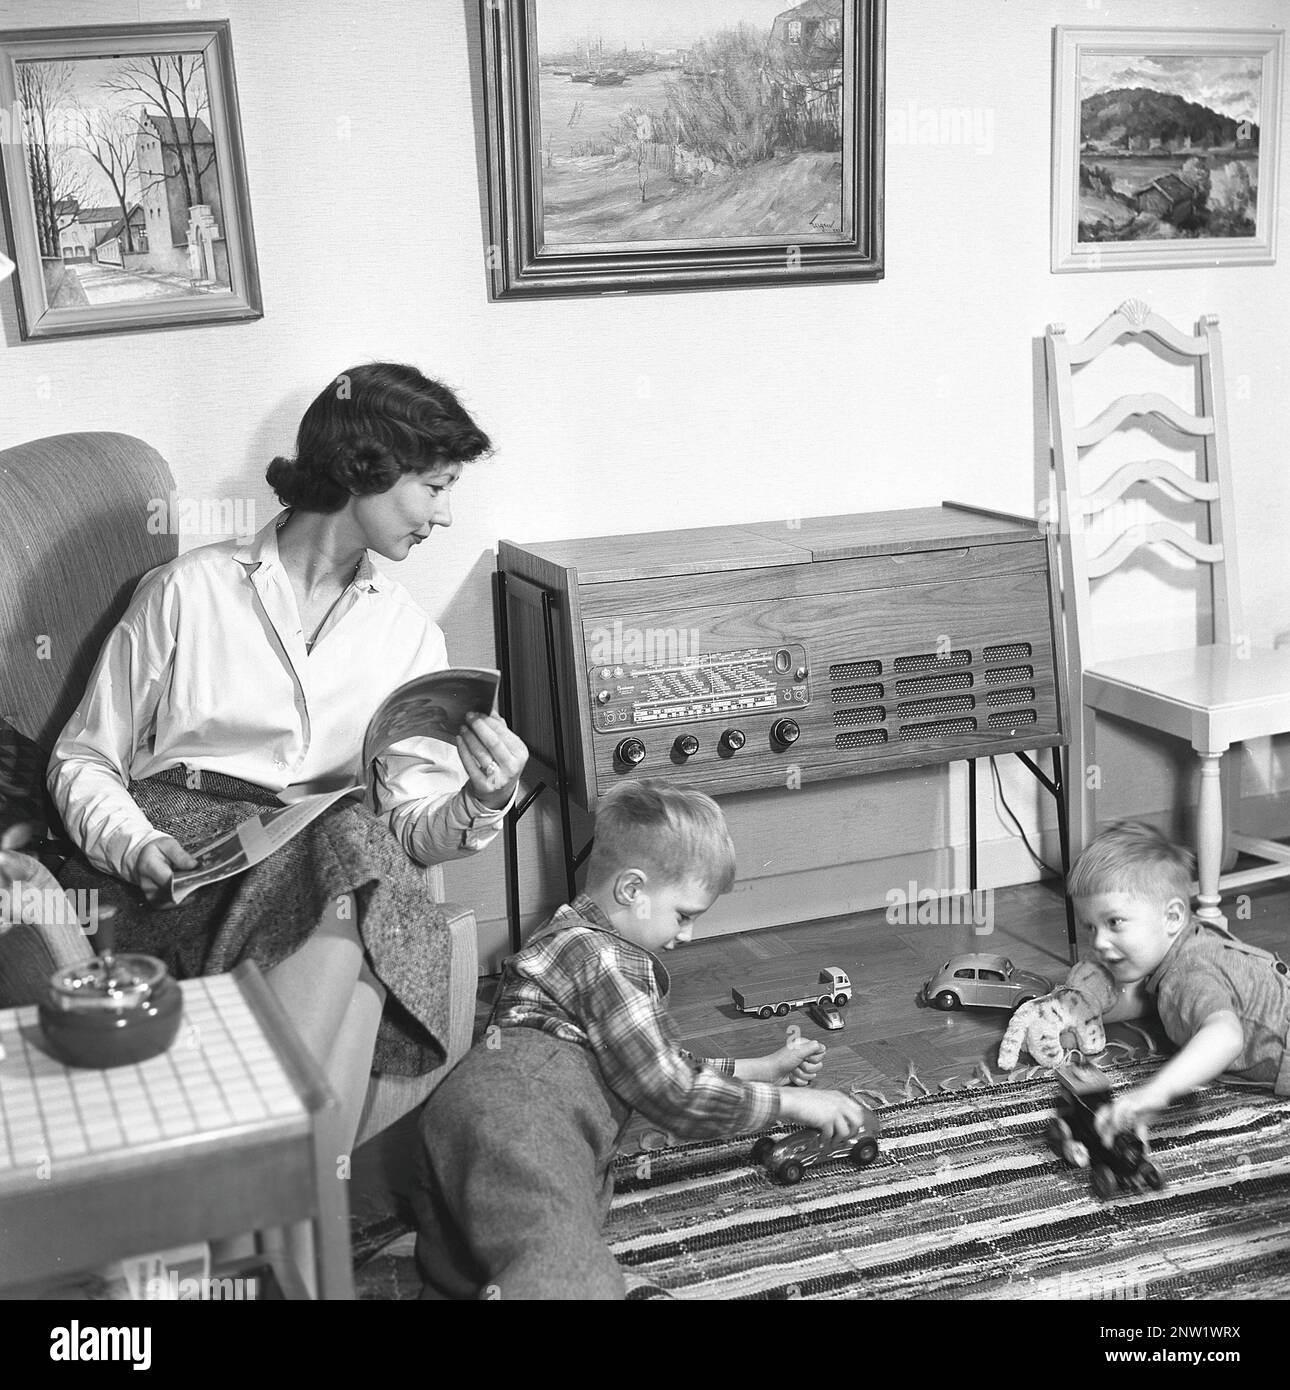 A housewife and mother with her two boys in front of the radio. Typical radio gramophone from 1957. A radio gramophone that gave the opportunity to listen to the radio and play gramophone records in the same unit. Sweden 1957. ref BV19-8 Stock Photo